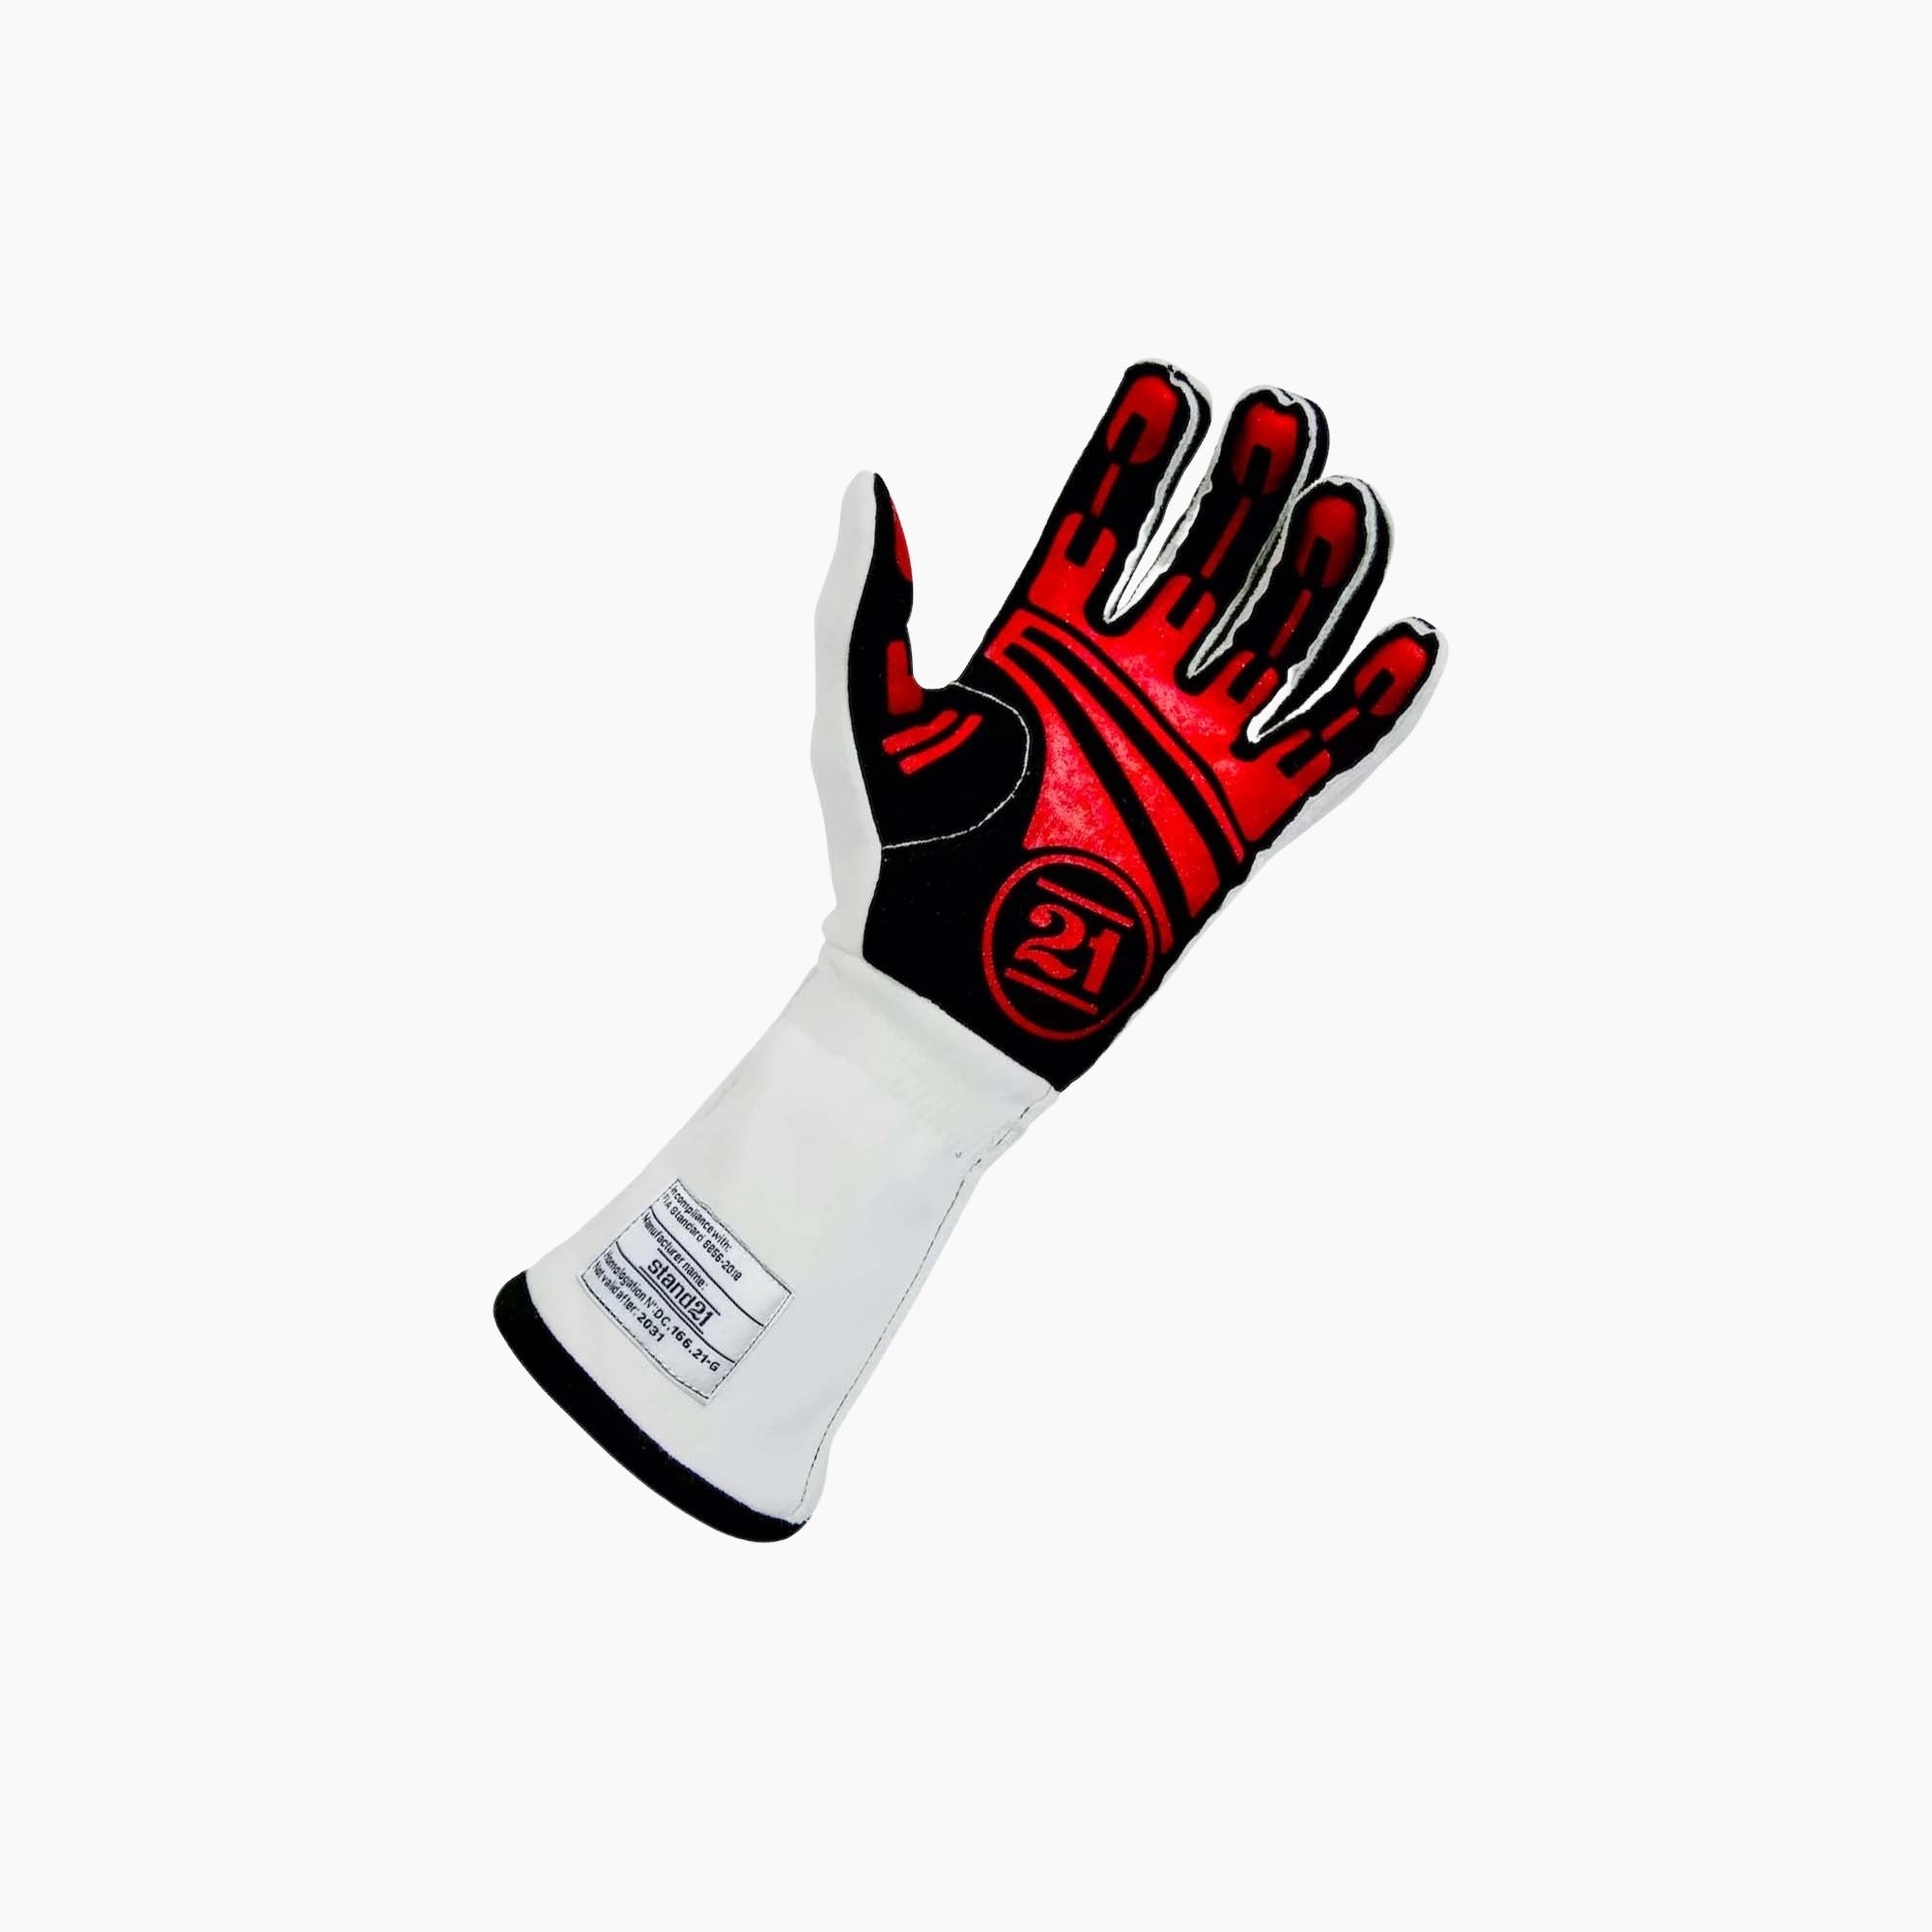 Stand 21 | Legacy Racing Gloves-Racing Gloves-STAND 21-gpx-store